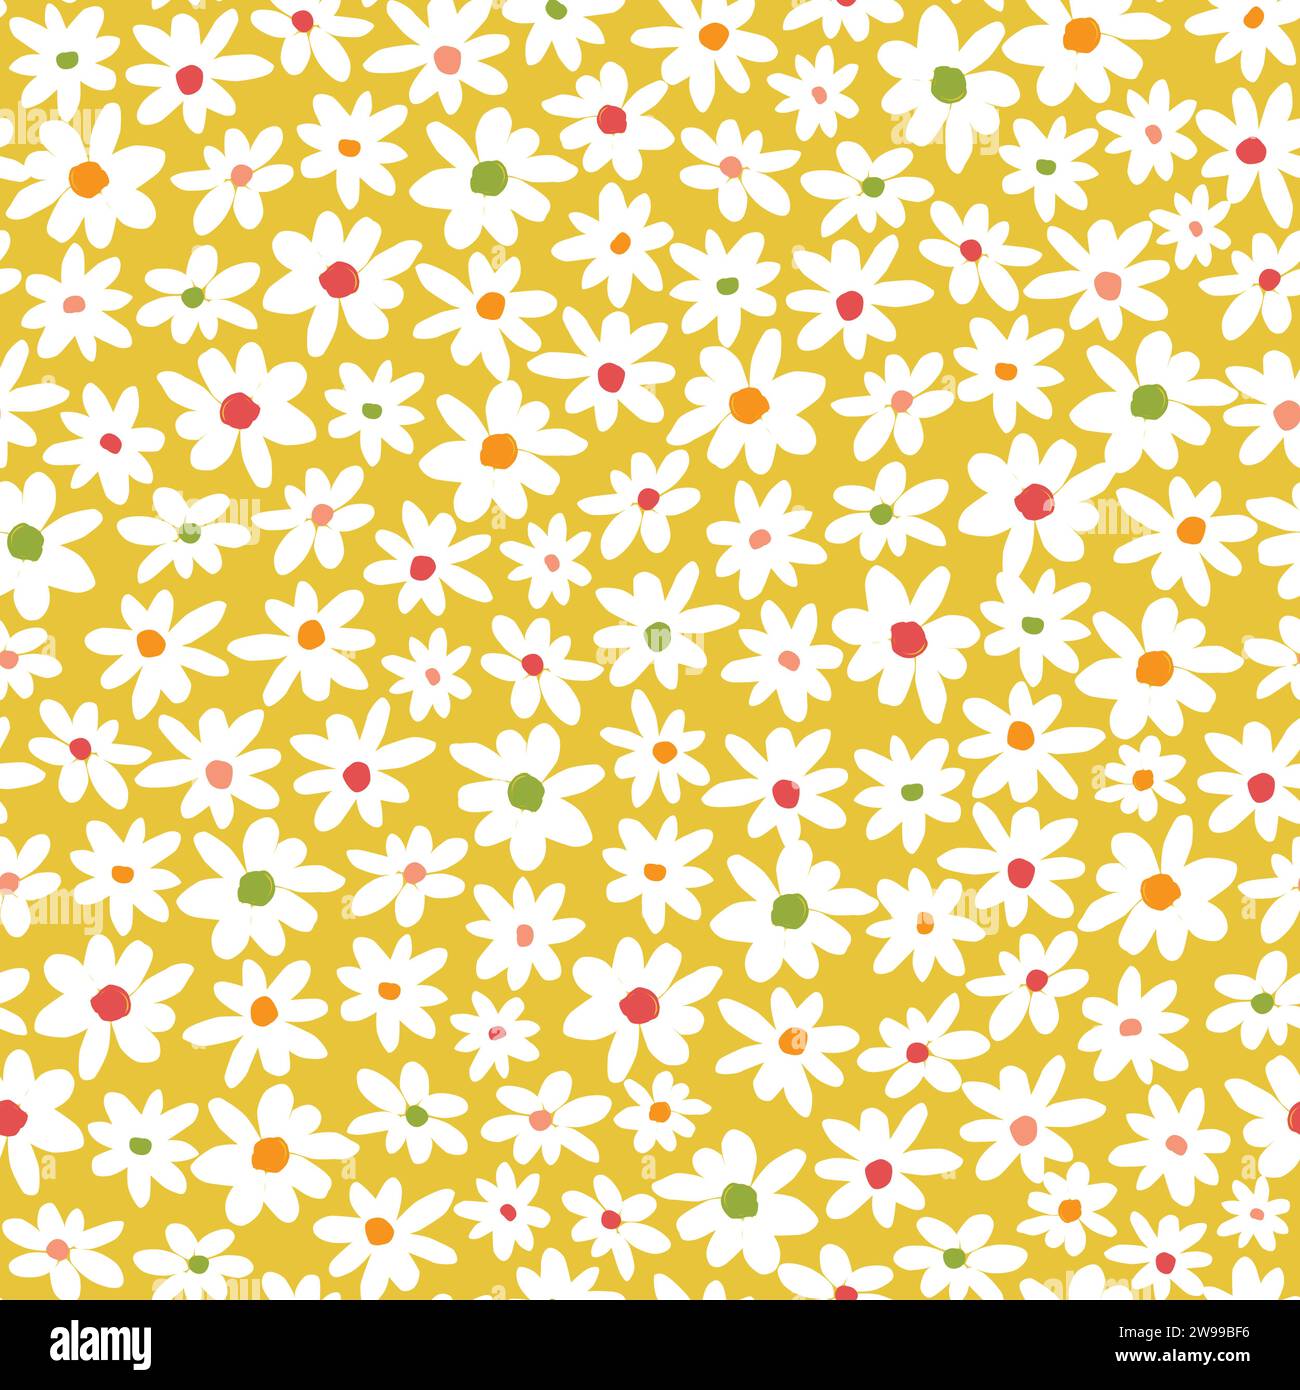 Vector yellow and white scattered fun daisy flowers repeat pattern with colourful center. Suitable for textile, gift wrap and wallpaper. Stock Vector